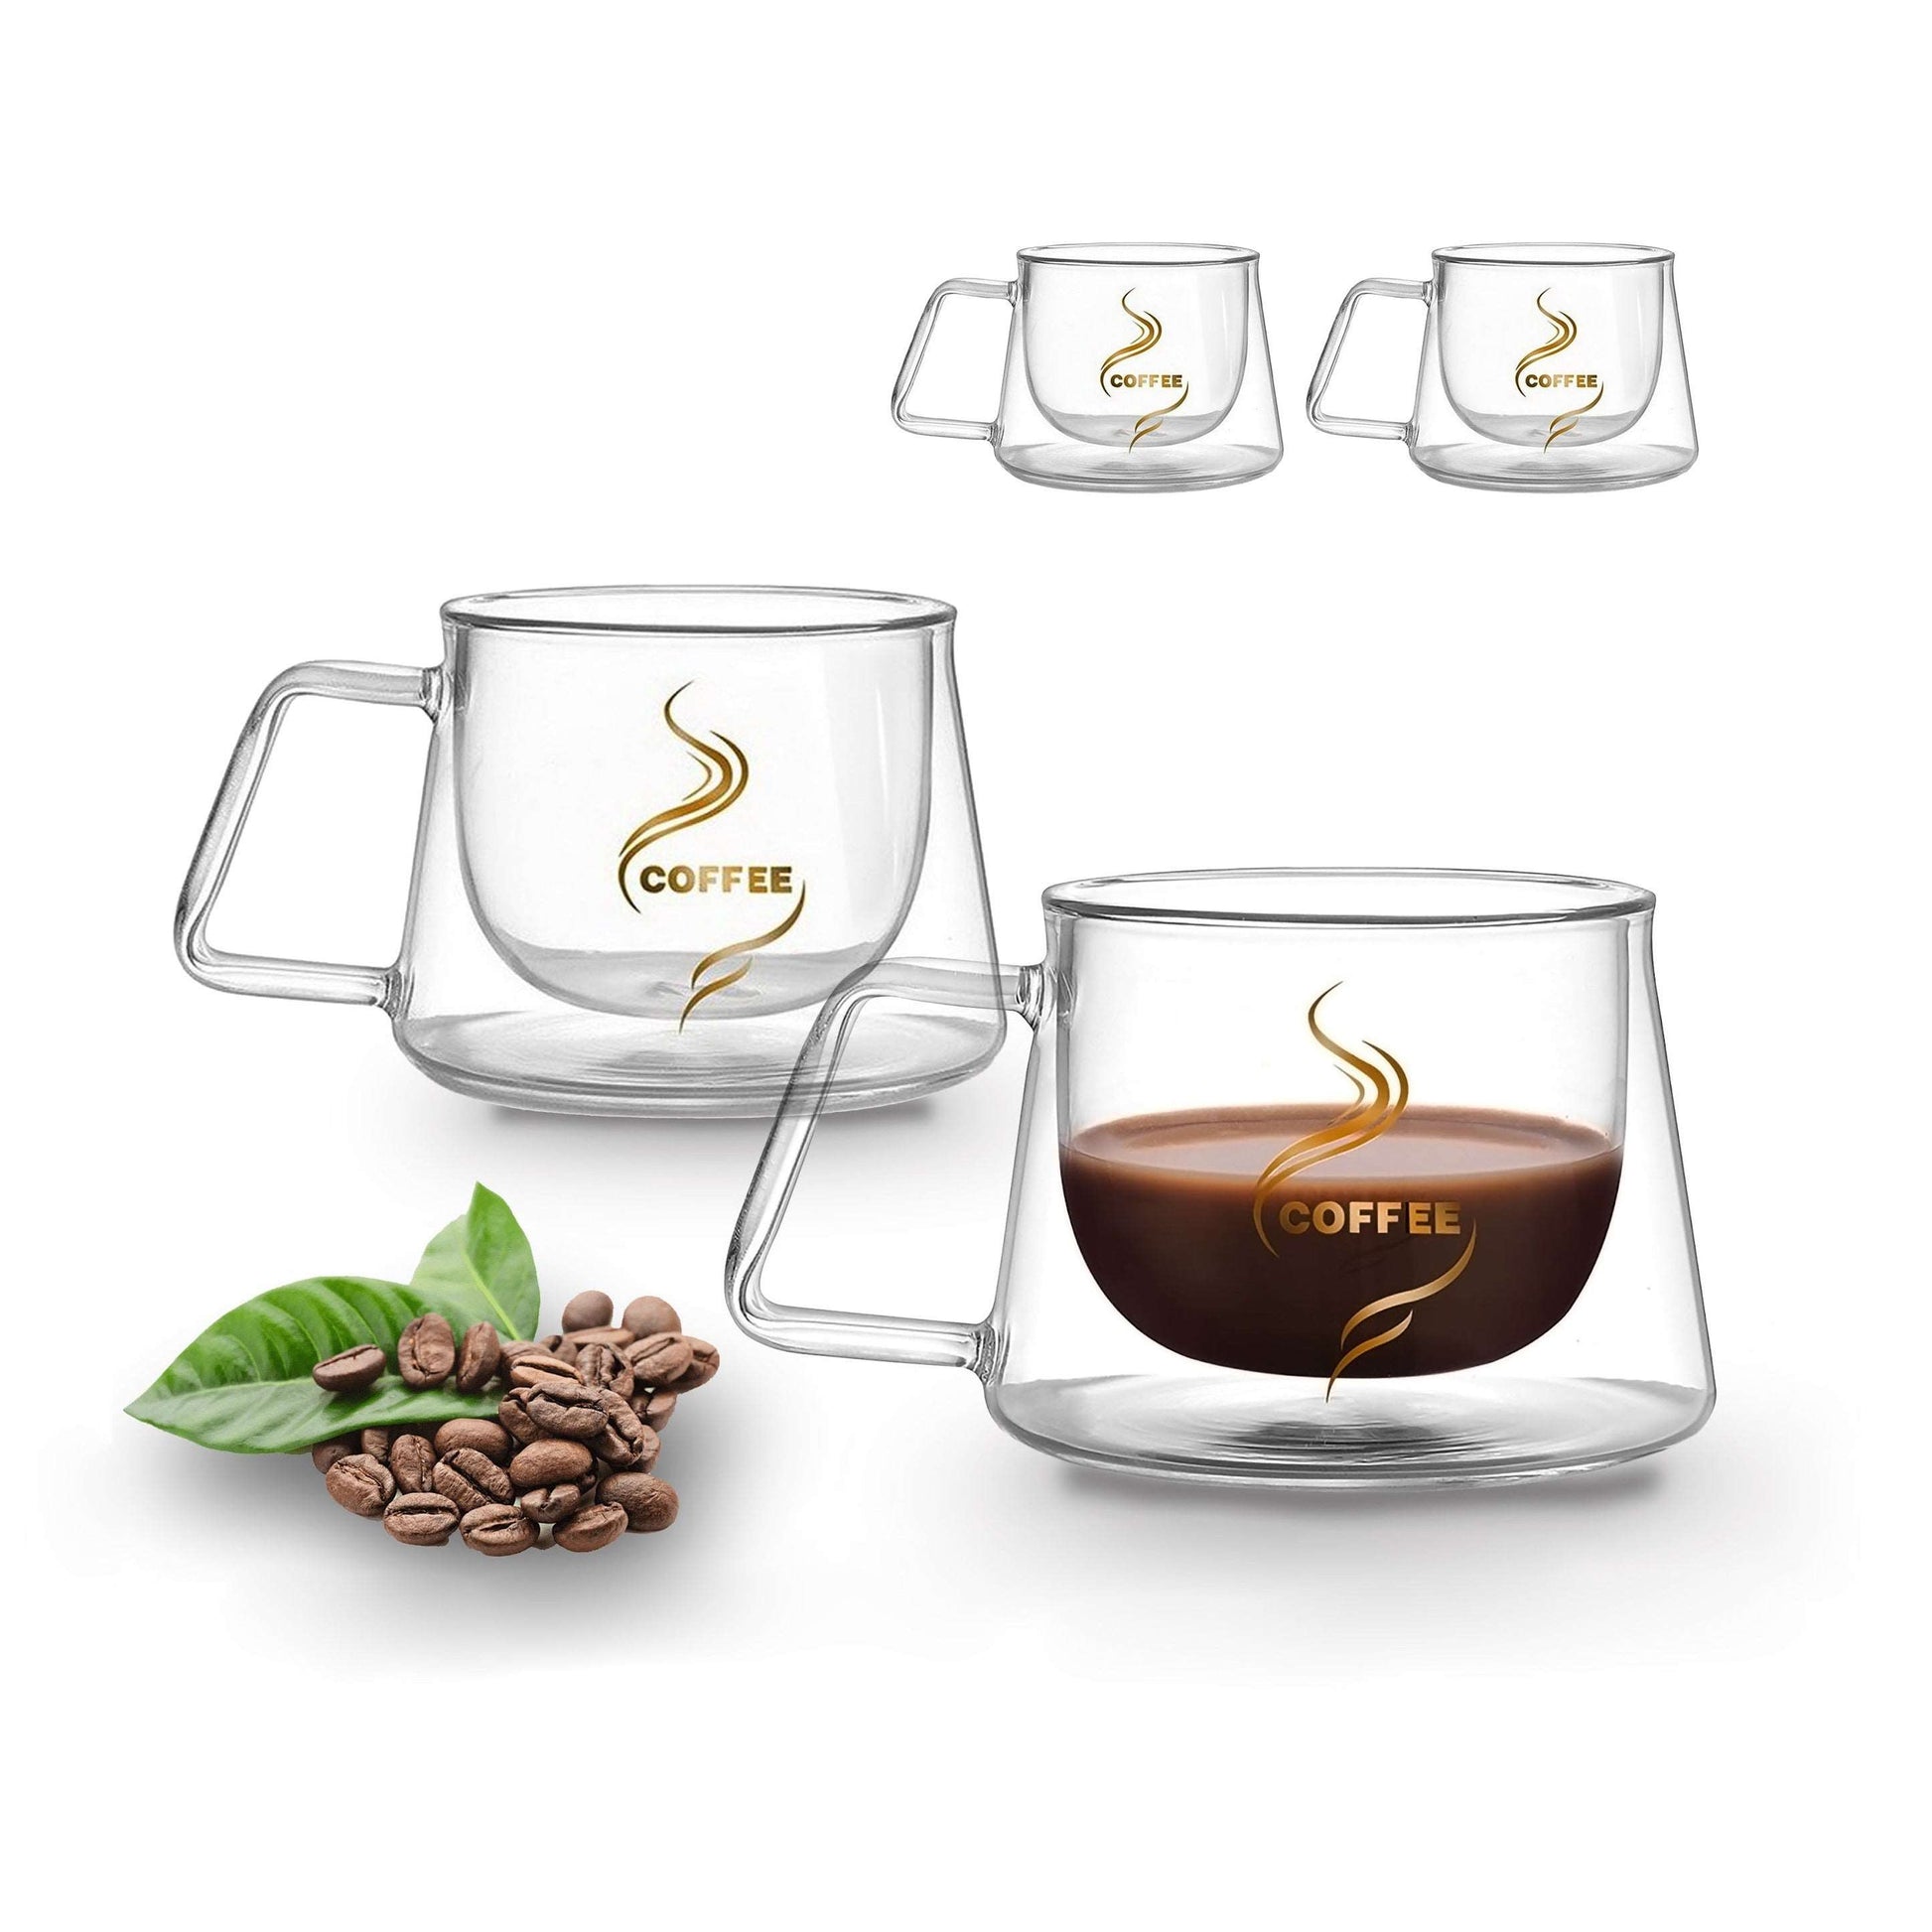 Espresso Cups Shot Glass Coffee 5 oz Set of 2 - Double Wall Insulated